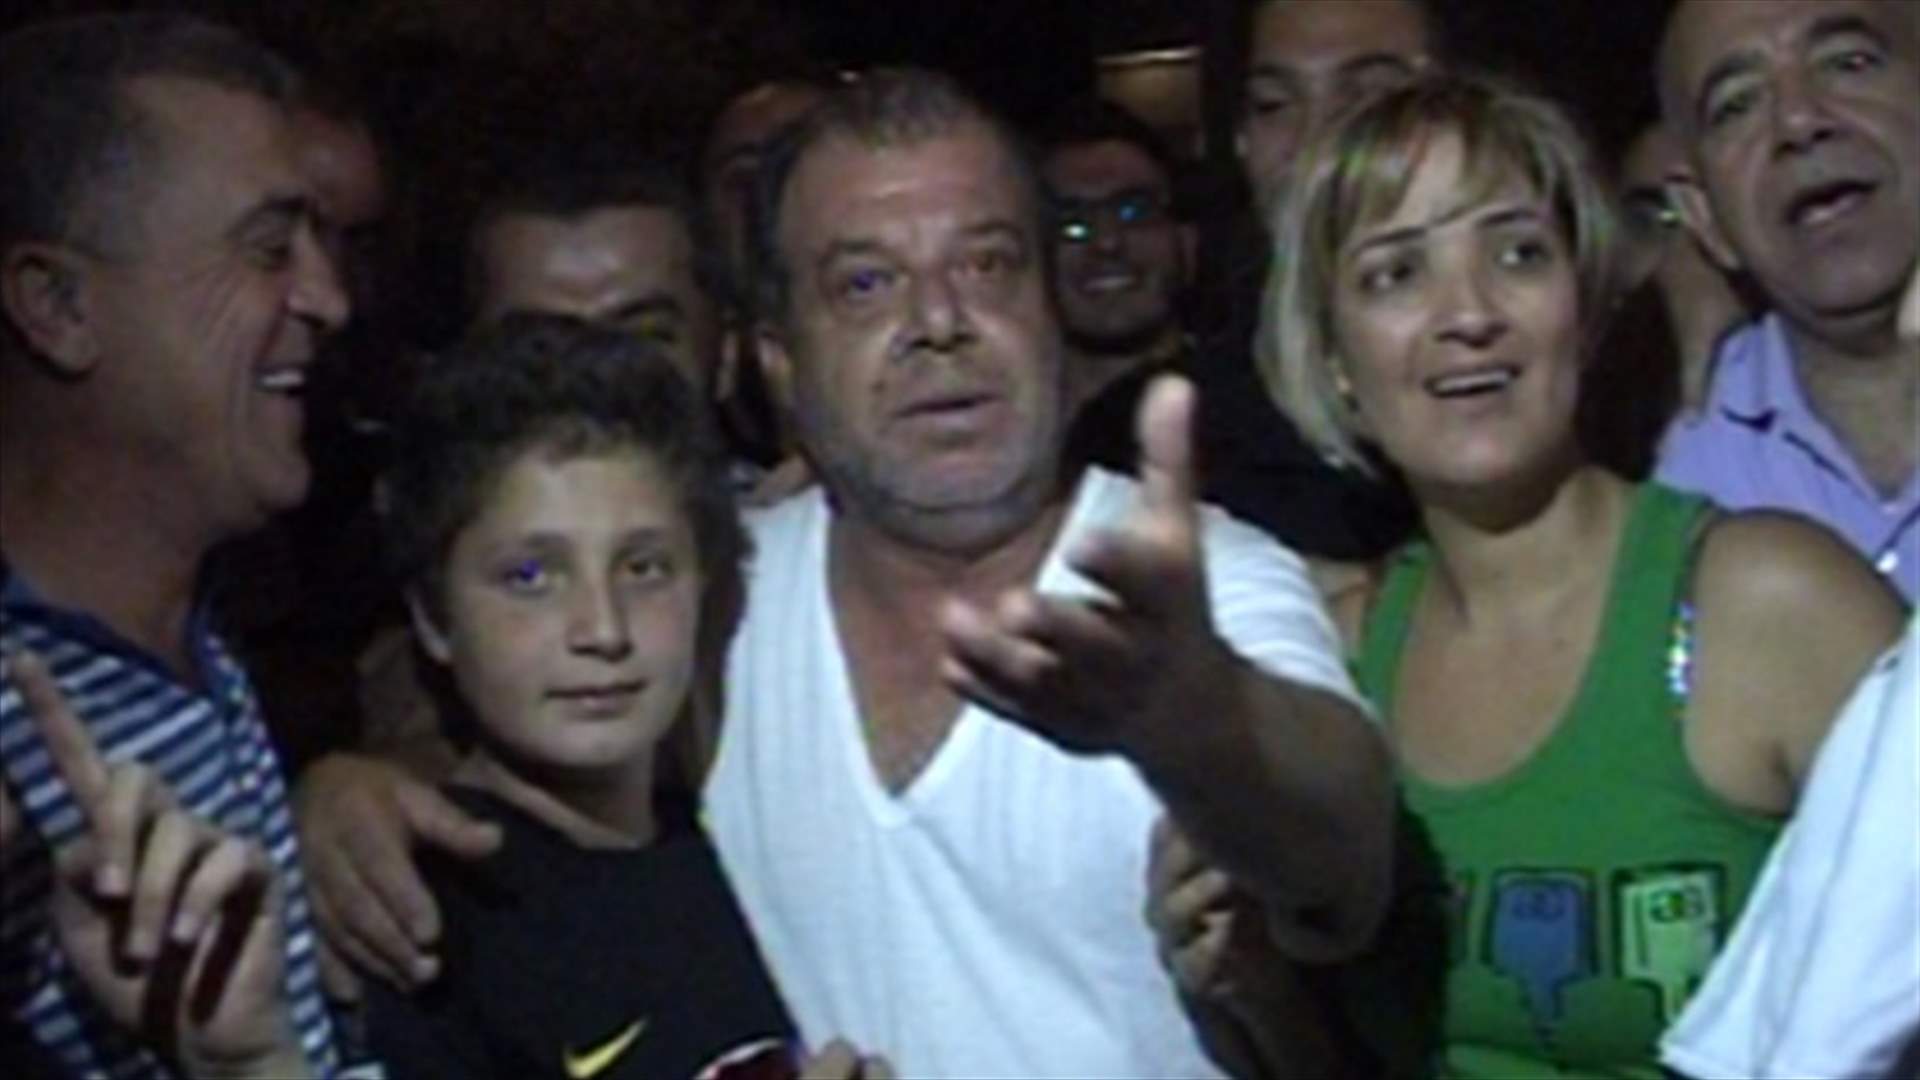 Hostage Fouad Daoud released following clashes with abductors 